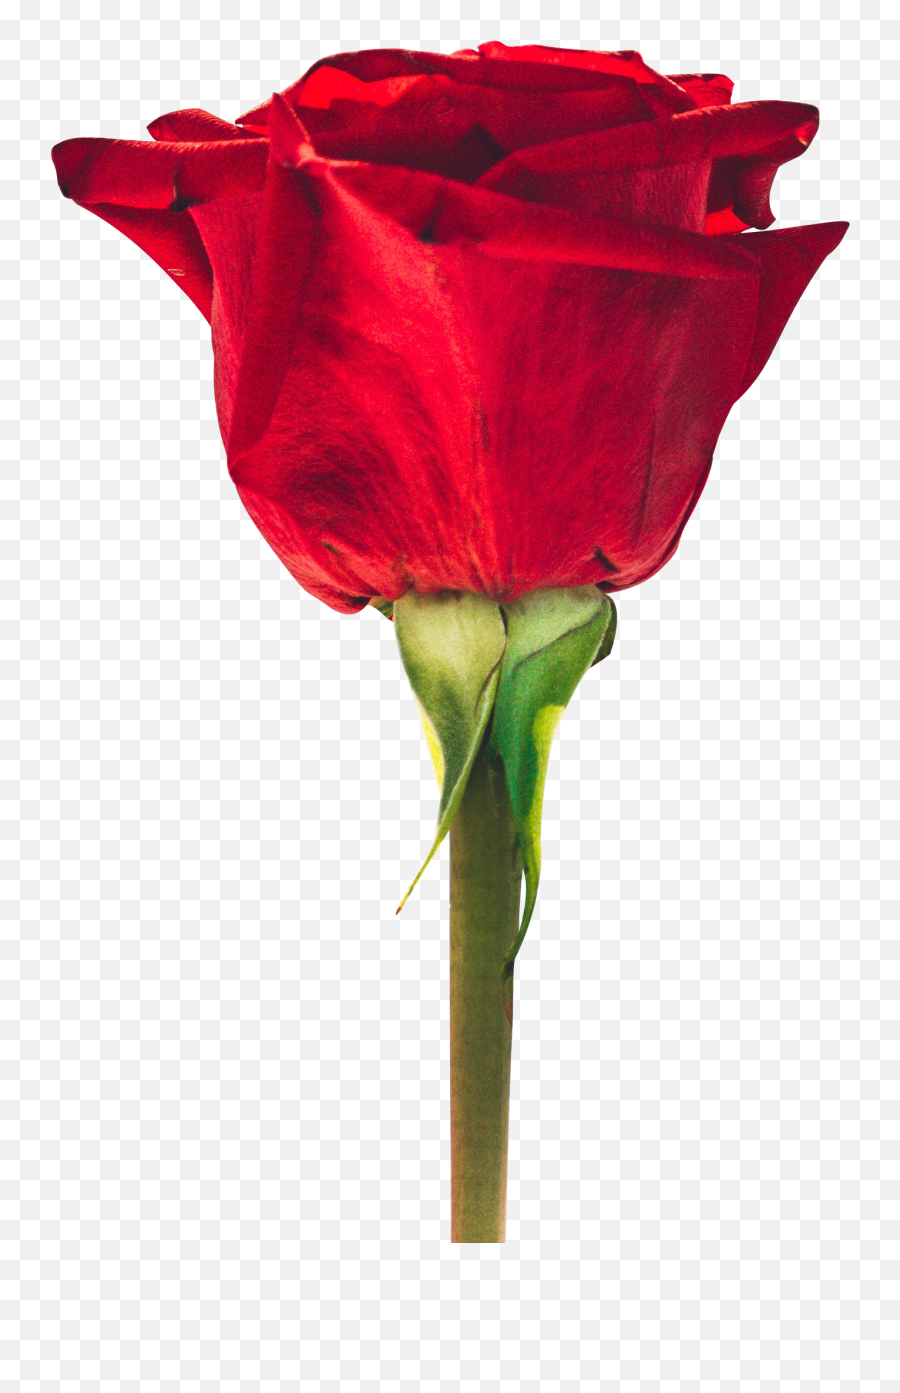 Transparent Beautiful Red Rose Png Free Download Searchpngcom - Good Morning Flower Images With Quotes,Flower Png Transparent